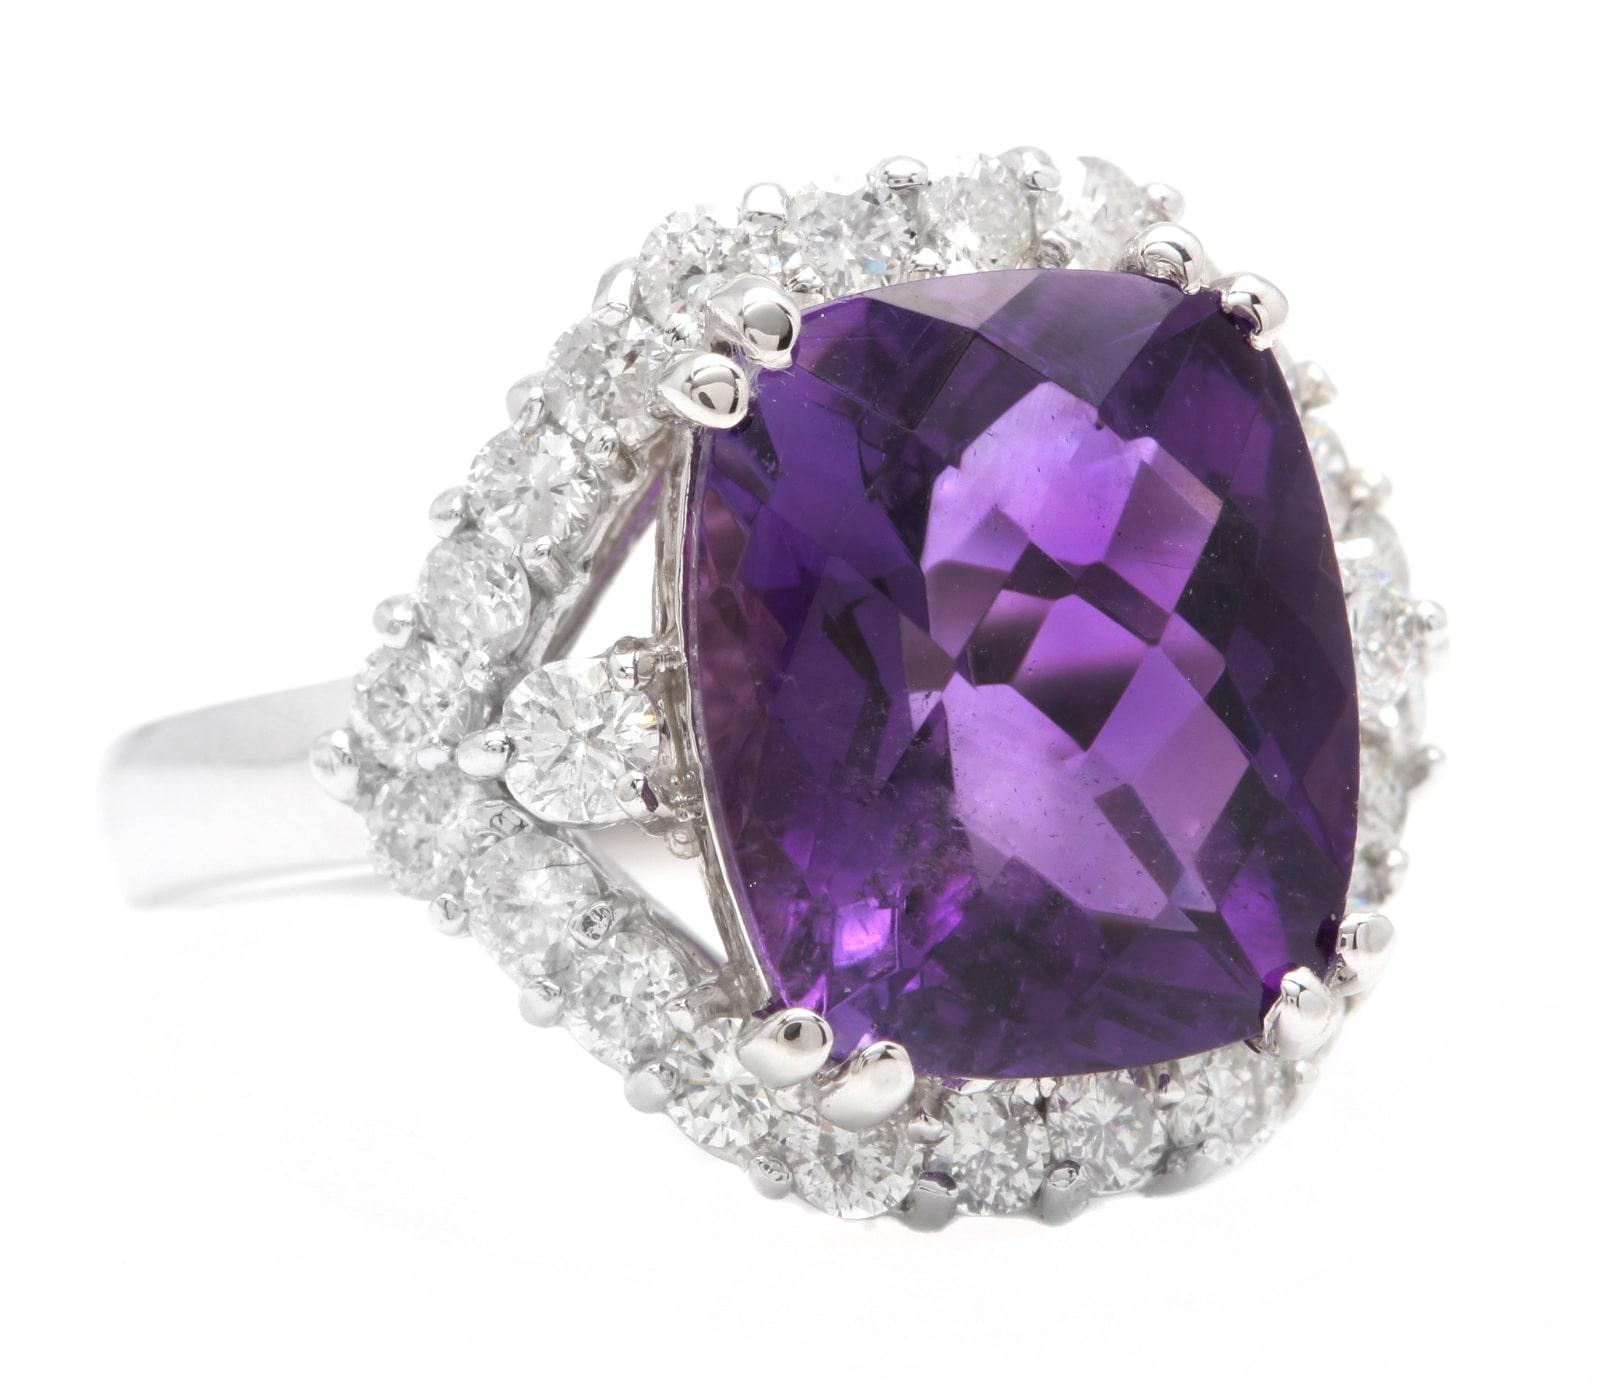 6.90 Carats Natural Amethyst and Diamond 14K Solid White Gold Ring

Suggested Replacement Value $5,000.00

Total Natural Checkerboard Cushion Cut Amethyst Weights: Approx. 6.00 Carats 

Amethyst Measures: Approx. 11.00 x 9.00mm

Natural Round